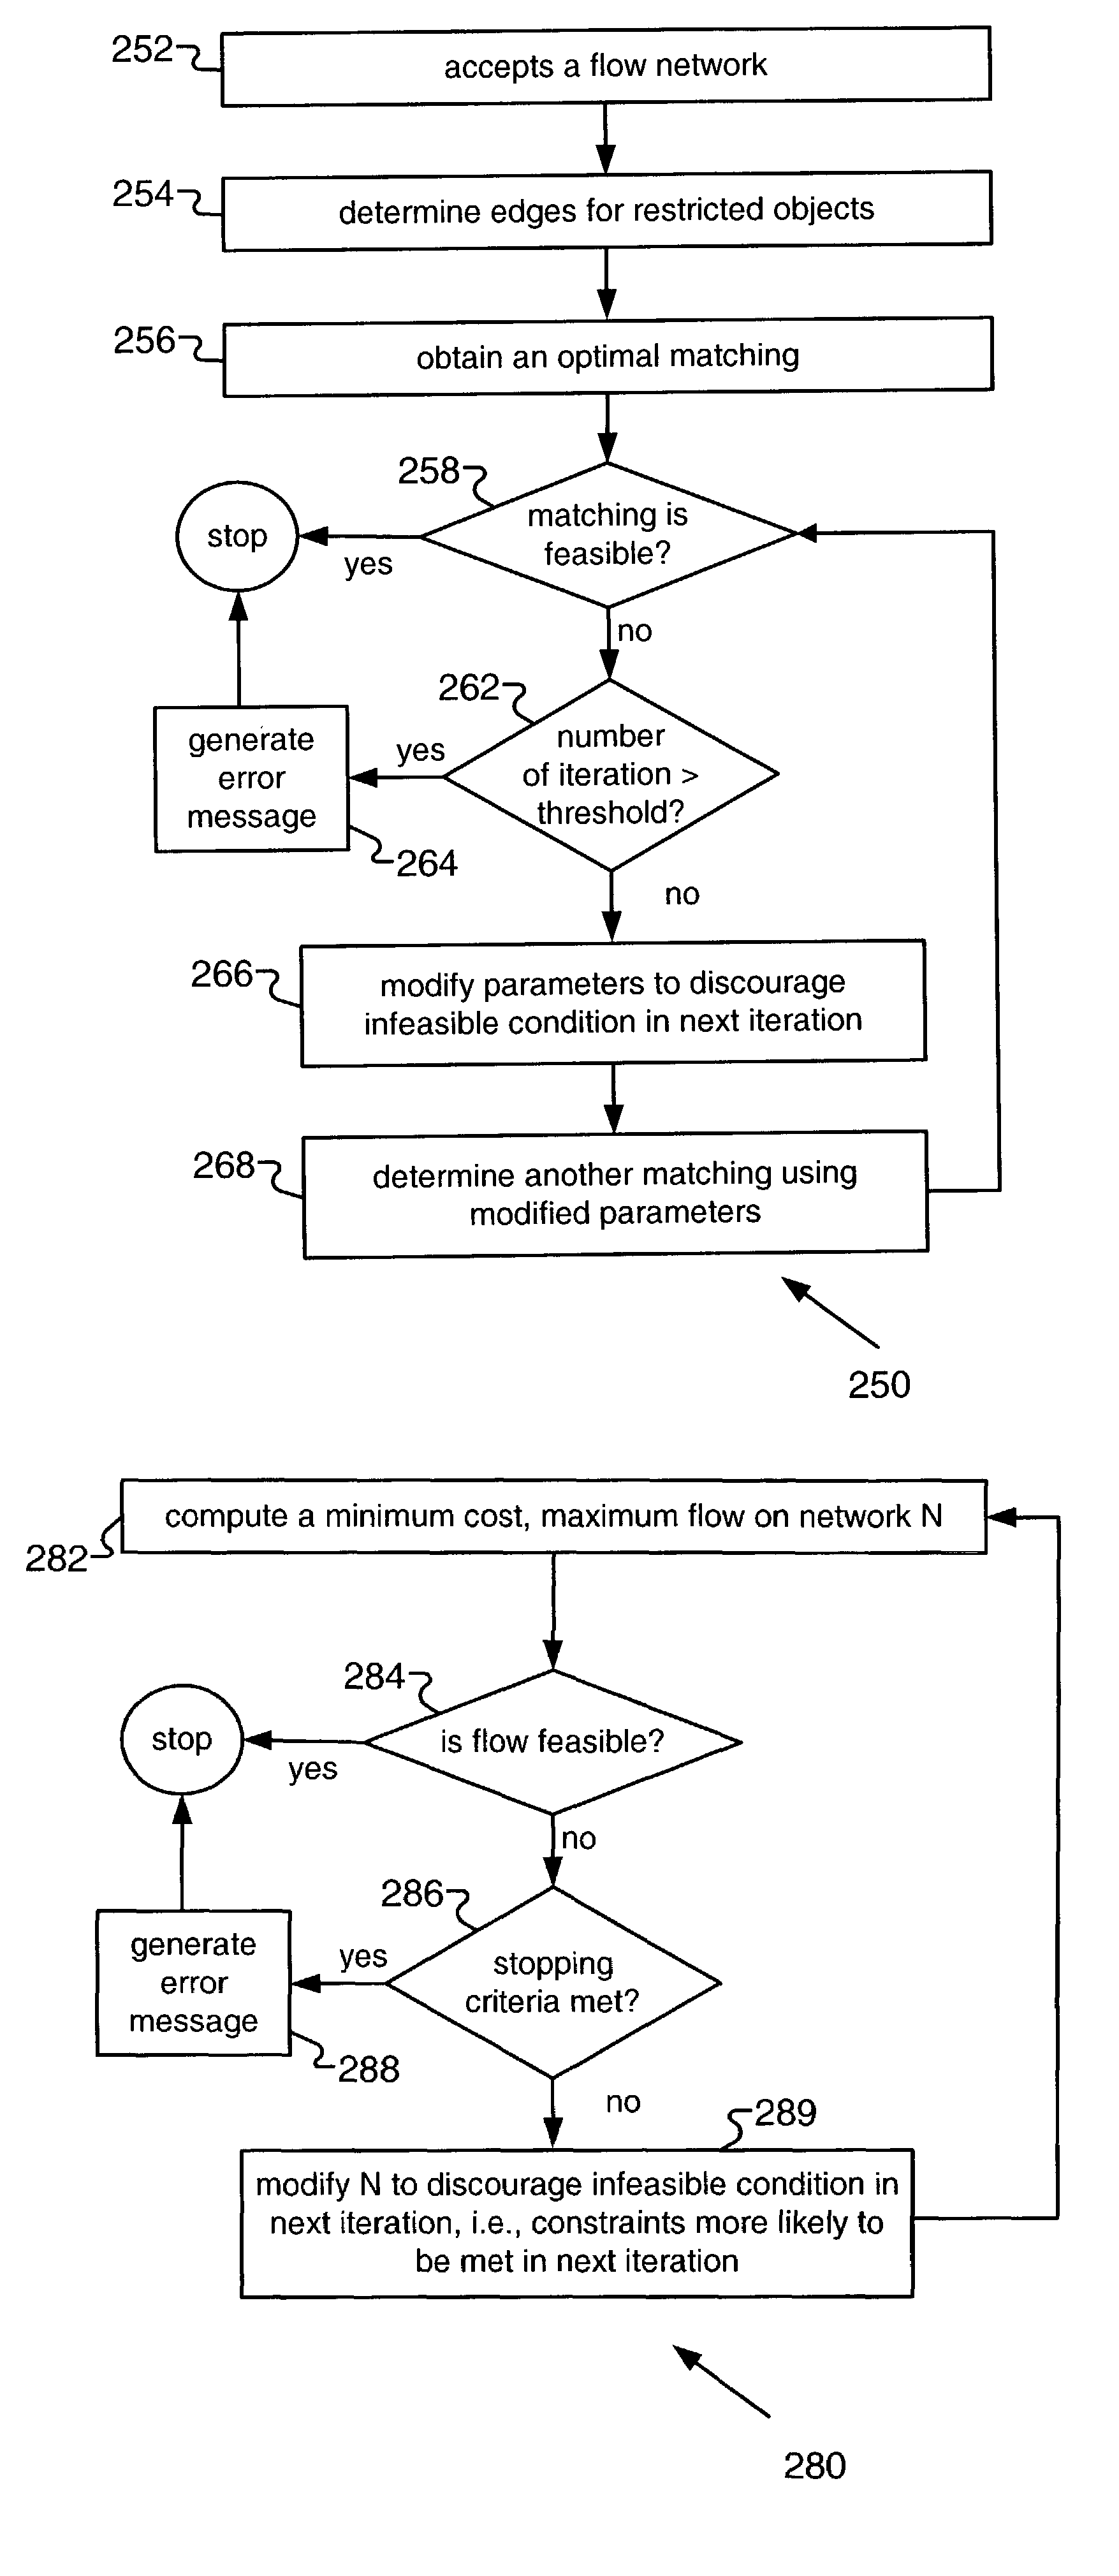 Method for application of network flow techniques under constraints